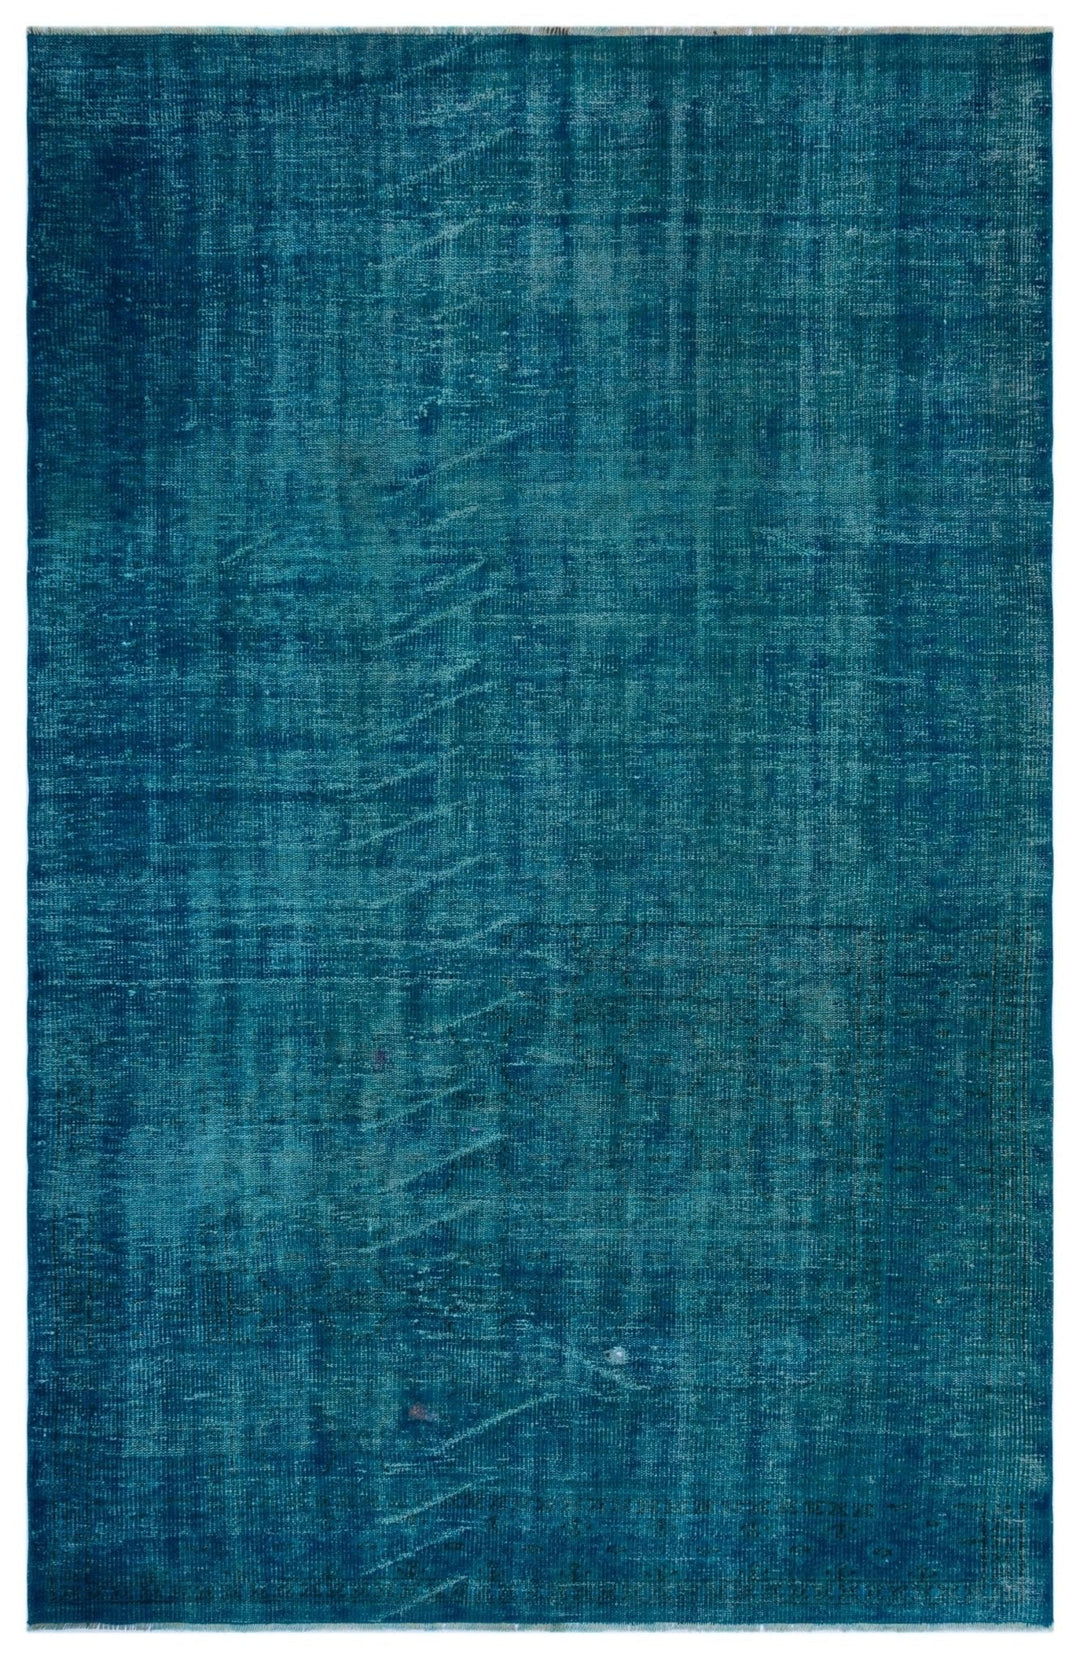 Athens 27859 Turquoise Tumbled Wool Hand Woven Rug 172 x 267